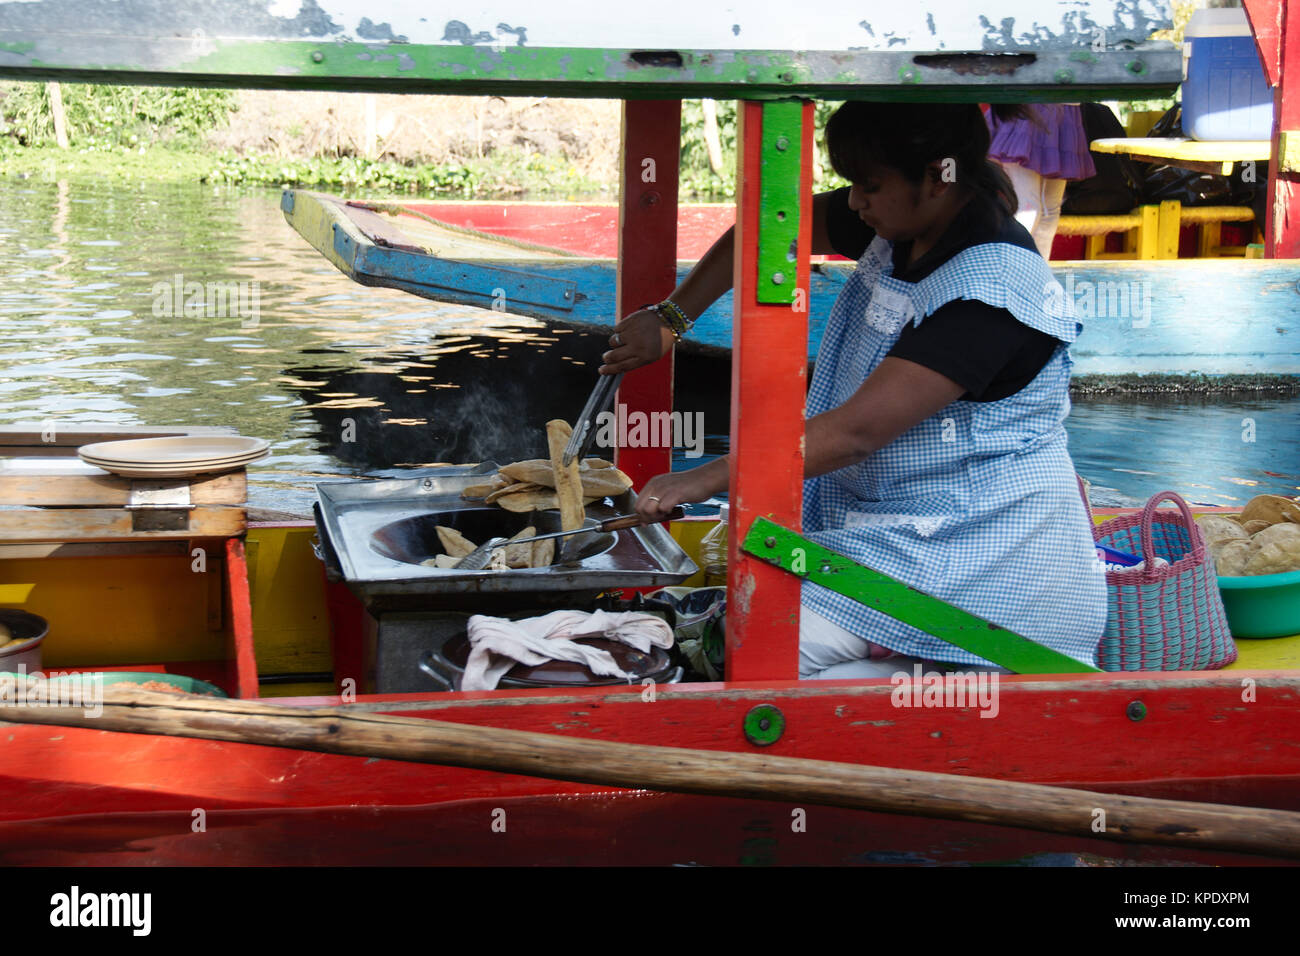 Xochimilco, Mexico City, Mexico - 2017: A woman on a trajinera (a local type of boat) cooks and sells local food to people in other trajineras Stock Photo